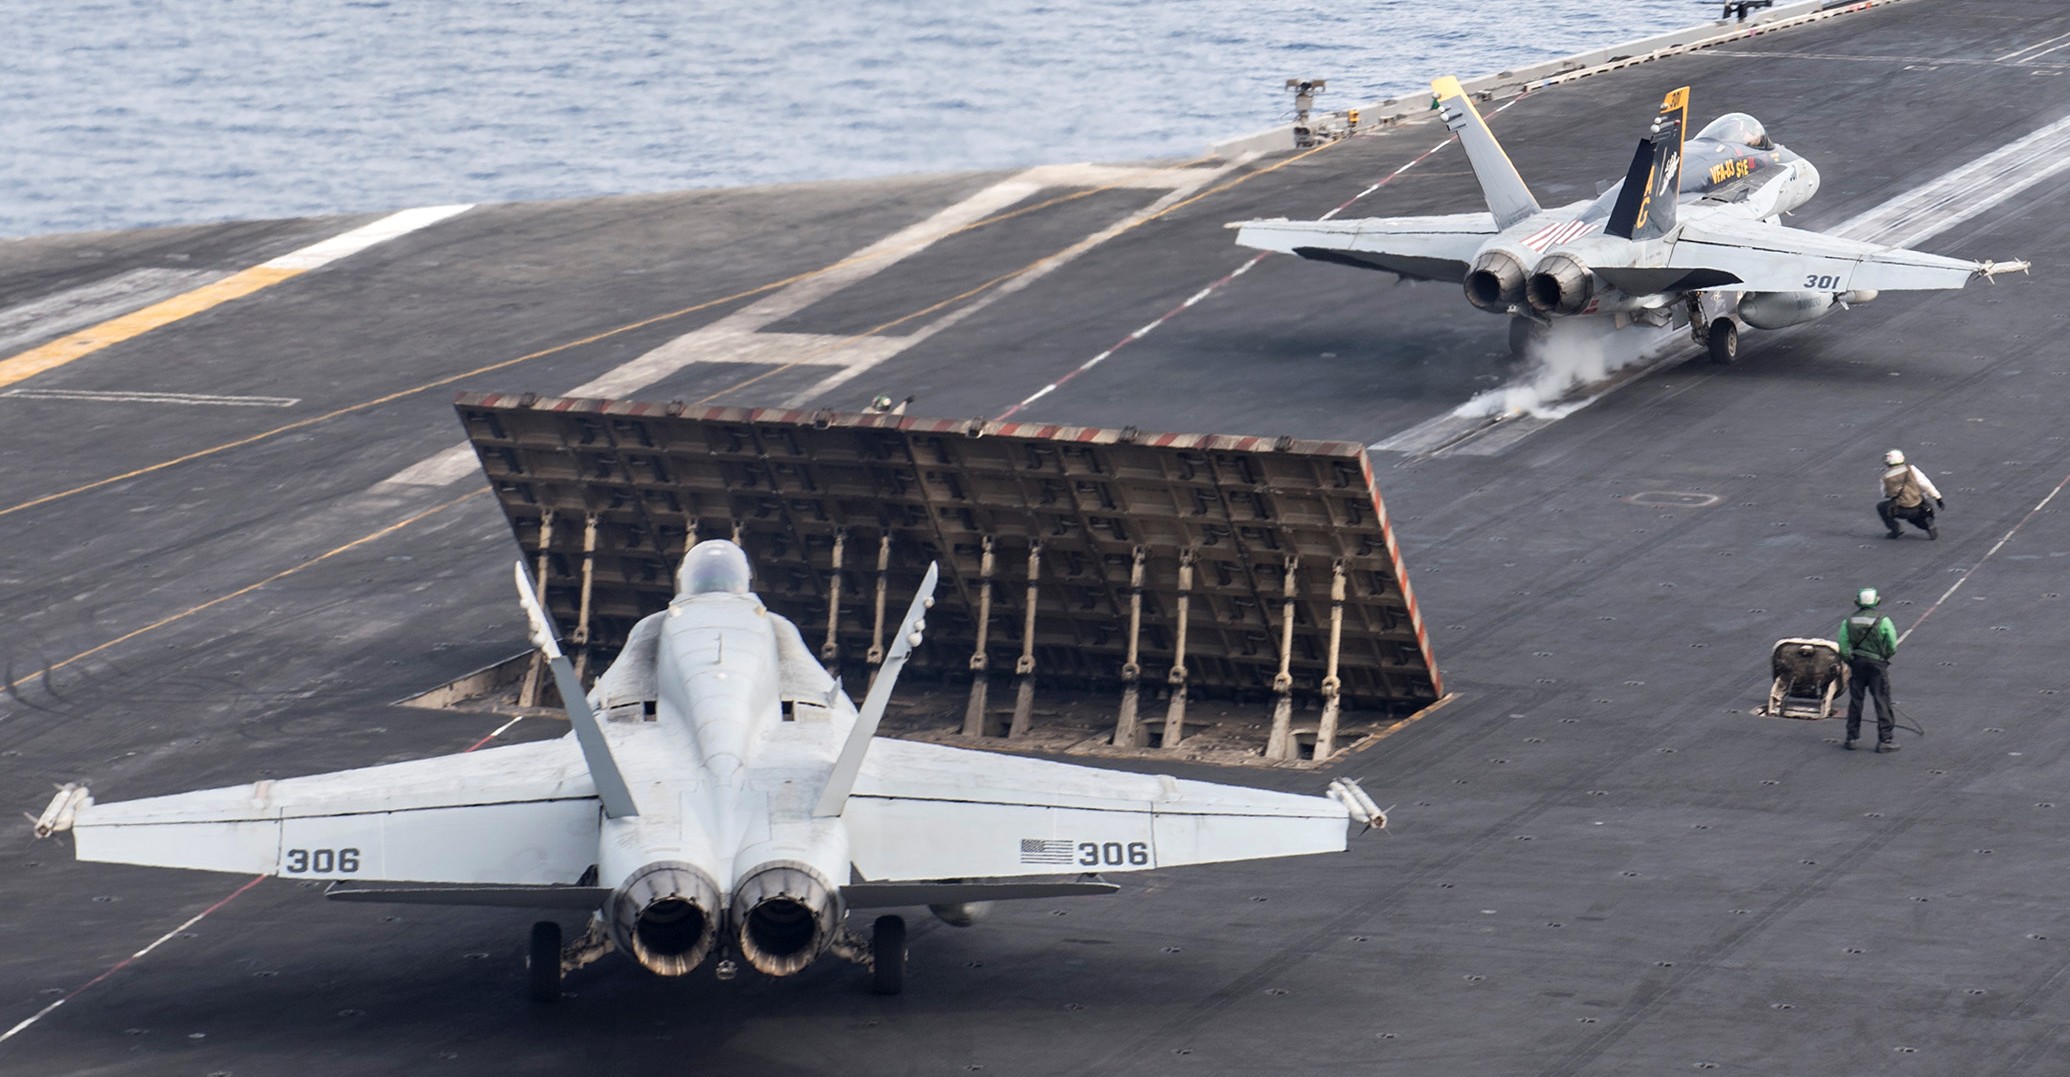 vfa-83 rampagers strike fighter squadron f/a-18c hornet cvw-7 uss harry s. truman cvn-75 56p